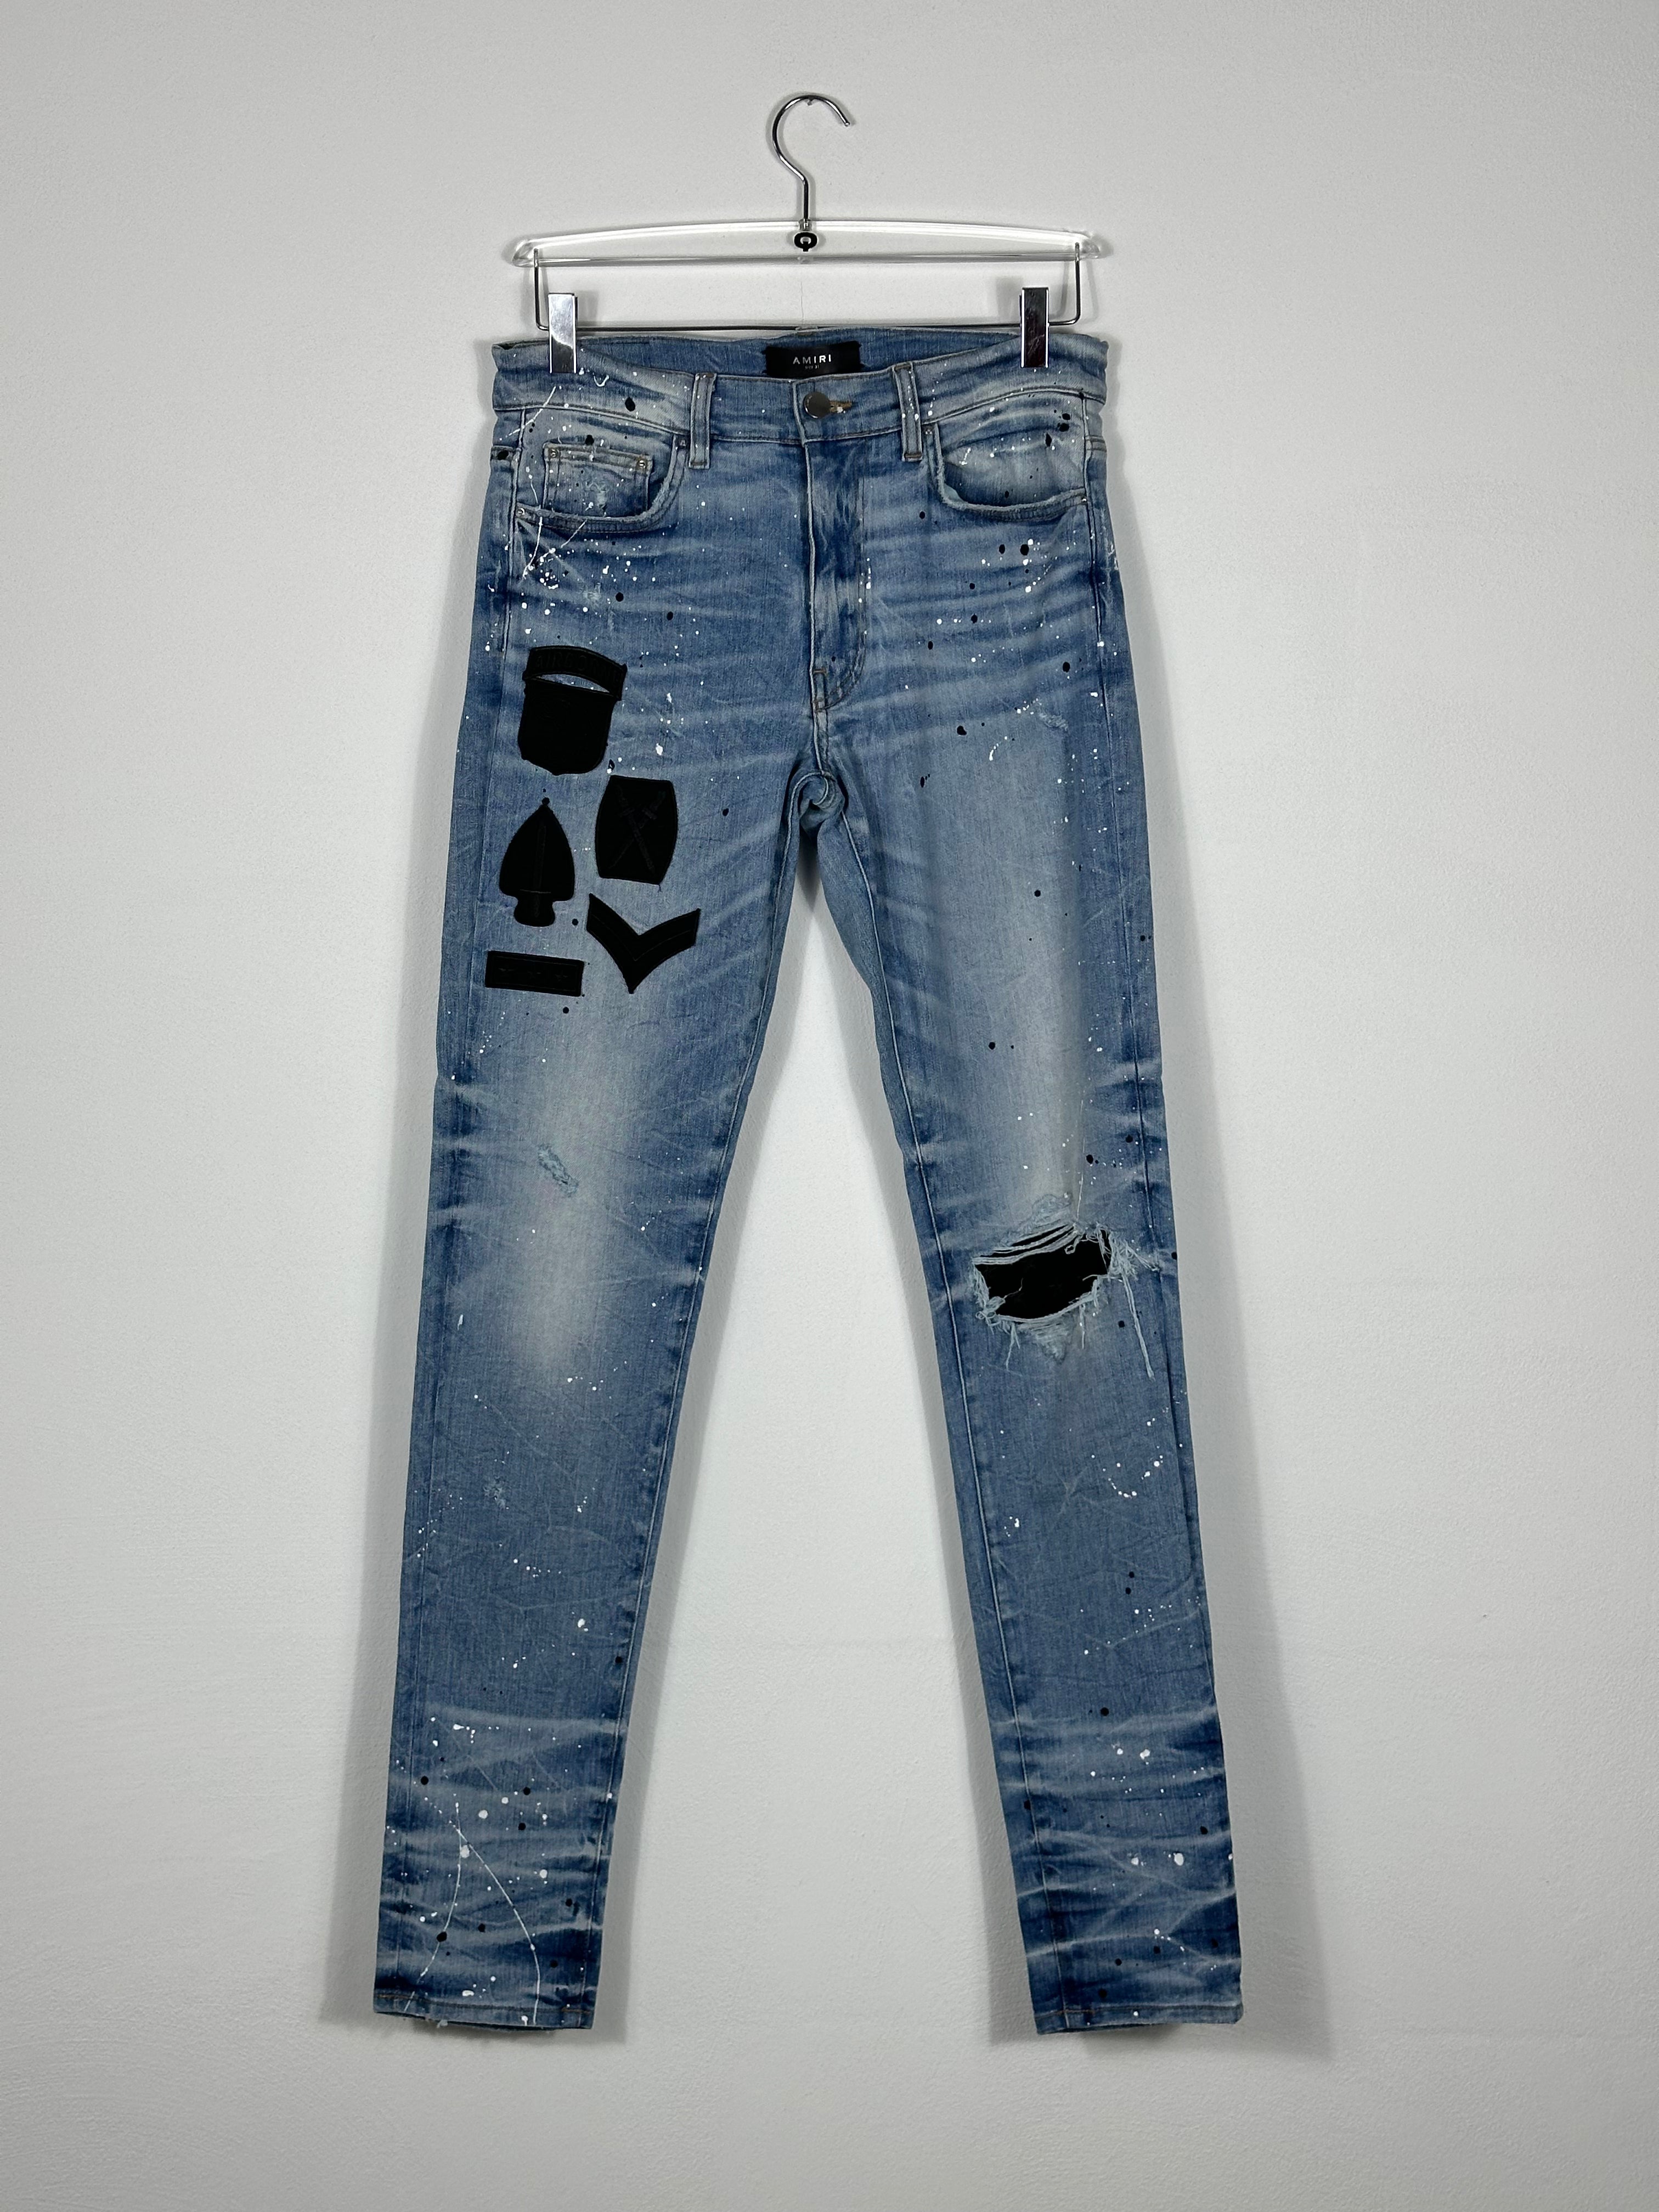 Painted Jeans by Sfera Ebbasta